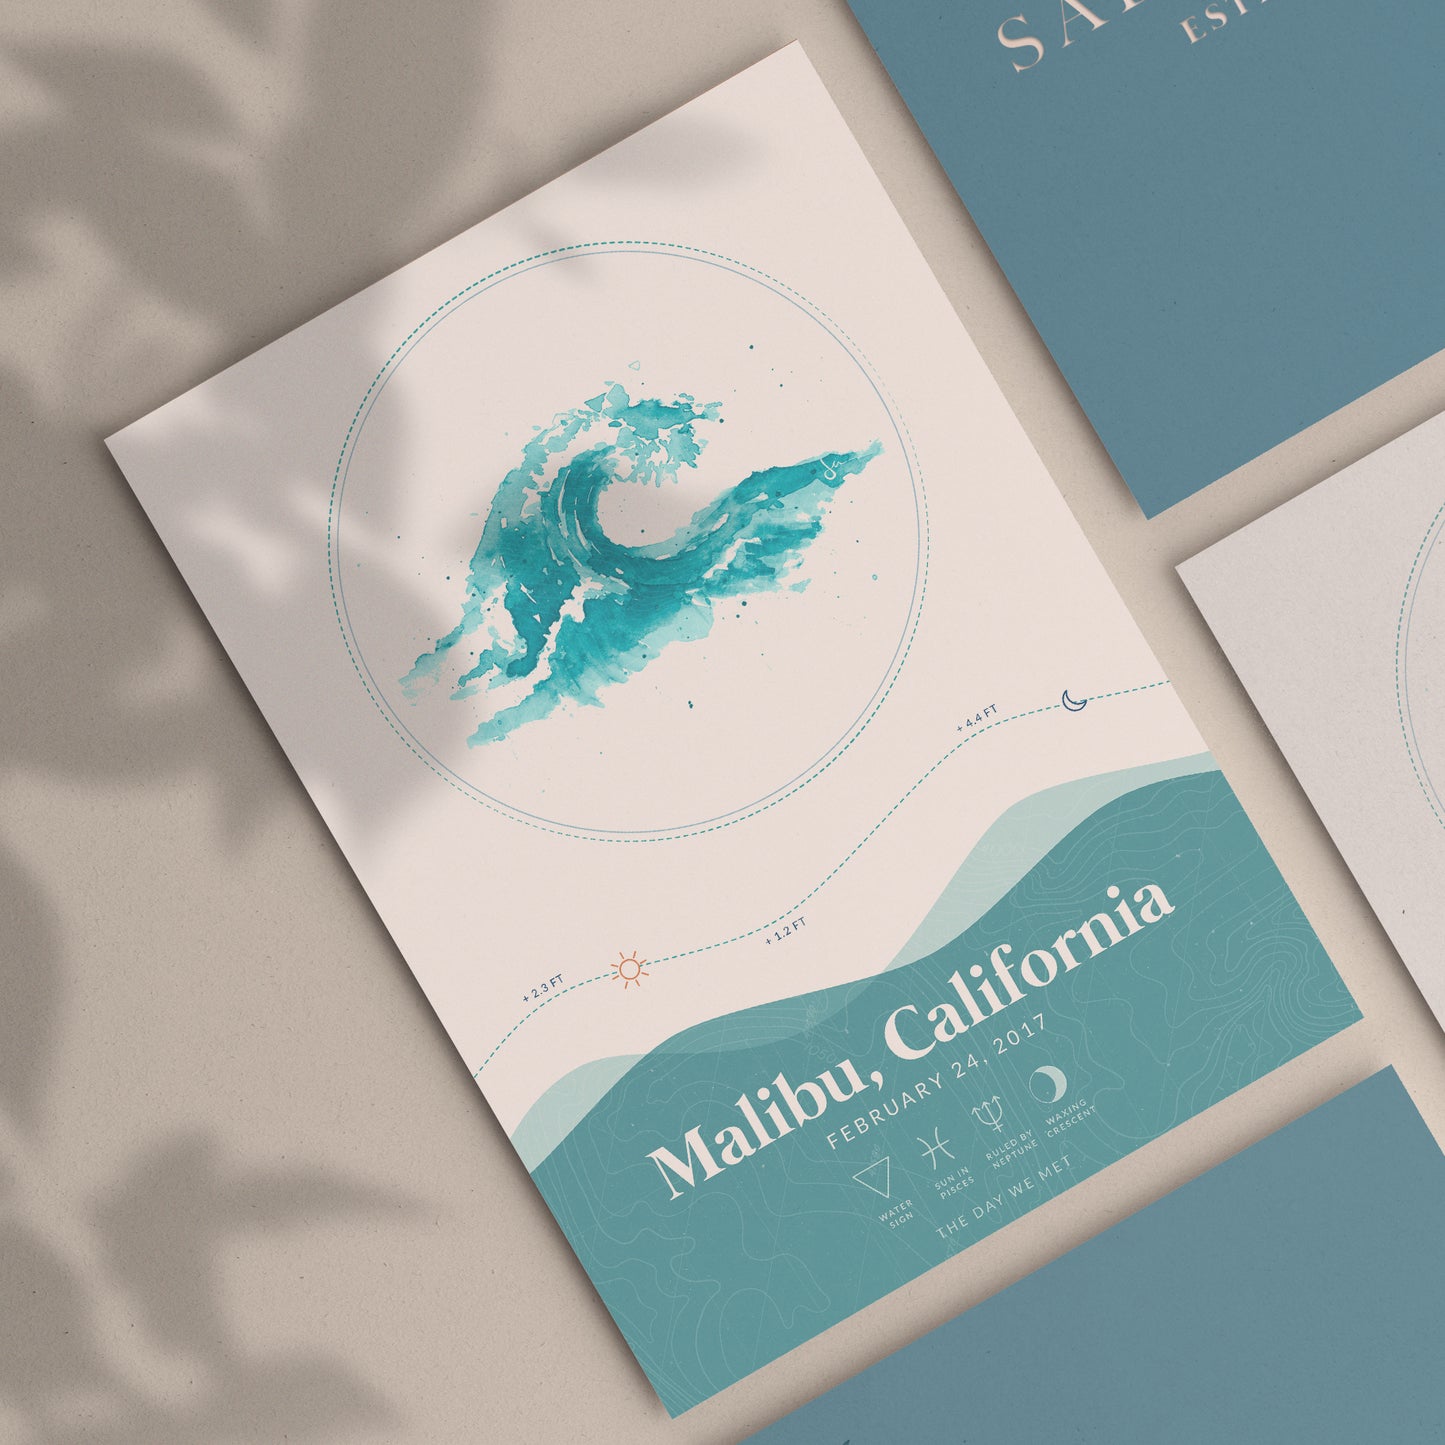 Waves Tide Map Poster showing Malibu, California in a flat lay layout. Waves Tide Map Posters by Salt Atlas are custom posters showing the tide, astrology zodiac sign, and moon phase for a special day, like an anniversary or birthday.